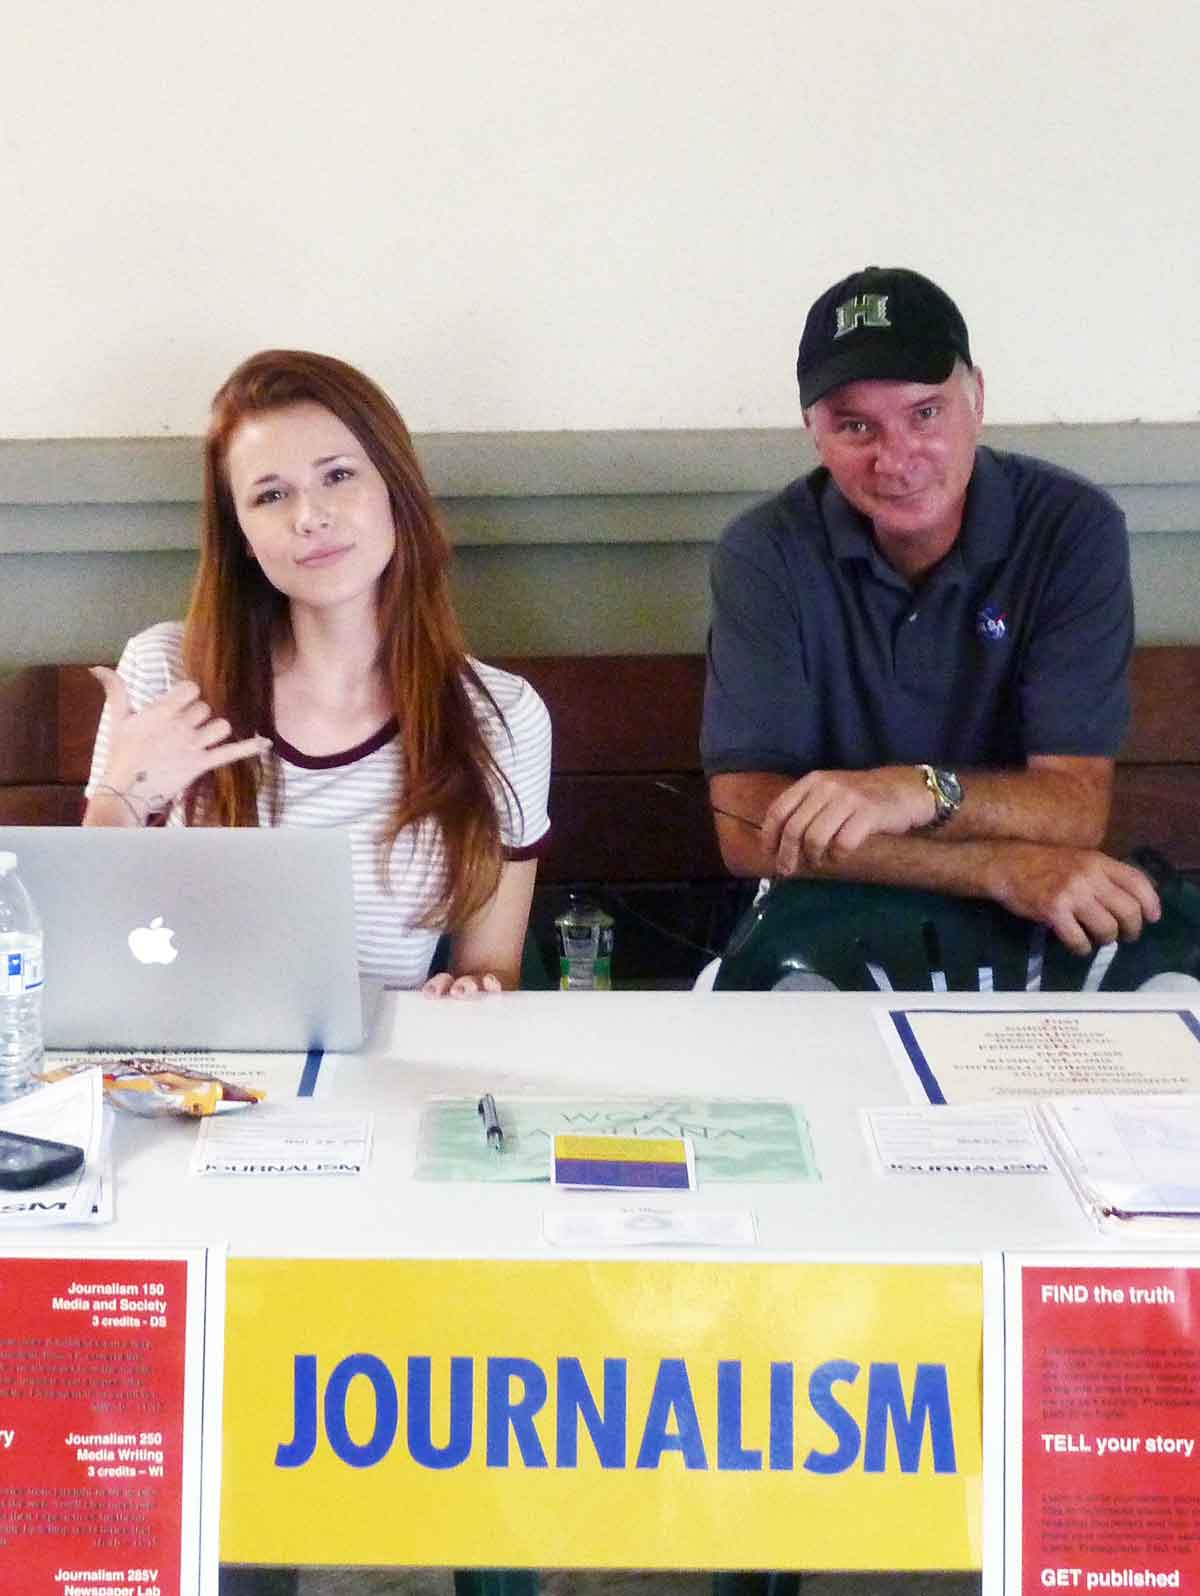 Gracie Berkley and Patrick Hascall help promote WCC journalism – Cynthia Lee Sinclair